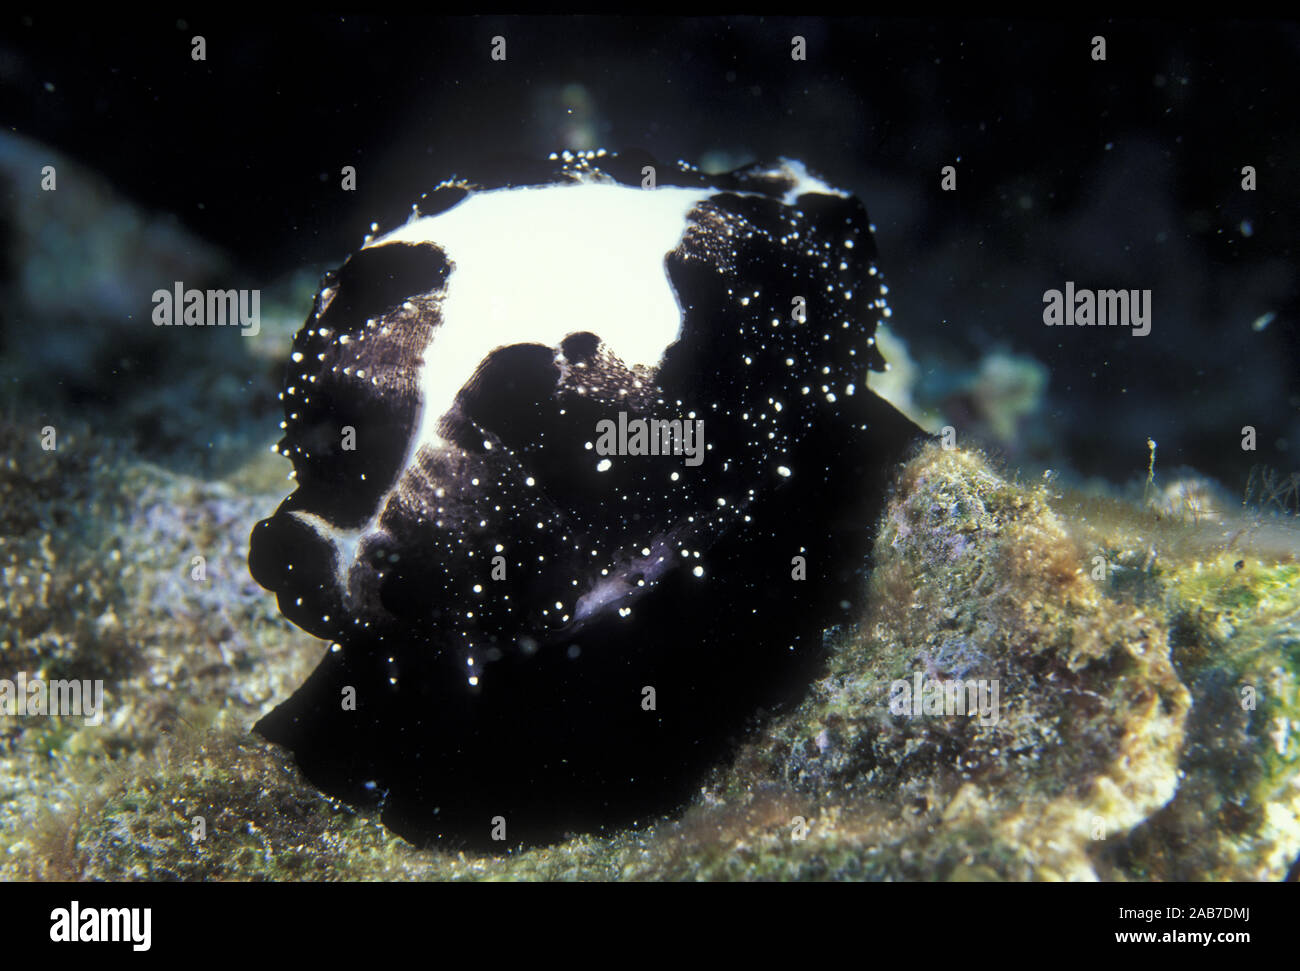 Egg cowries (Ovula ovum), showing white shells with black mantles. Solitary Island, New South Wales, Australia Stock Photo